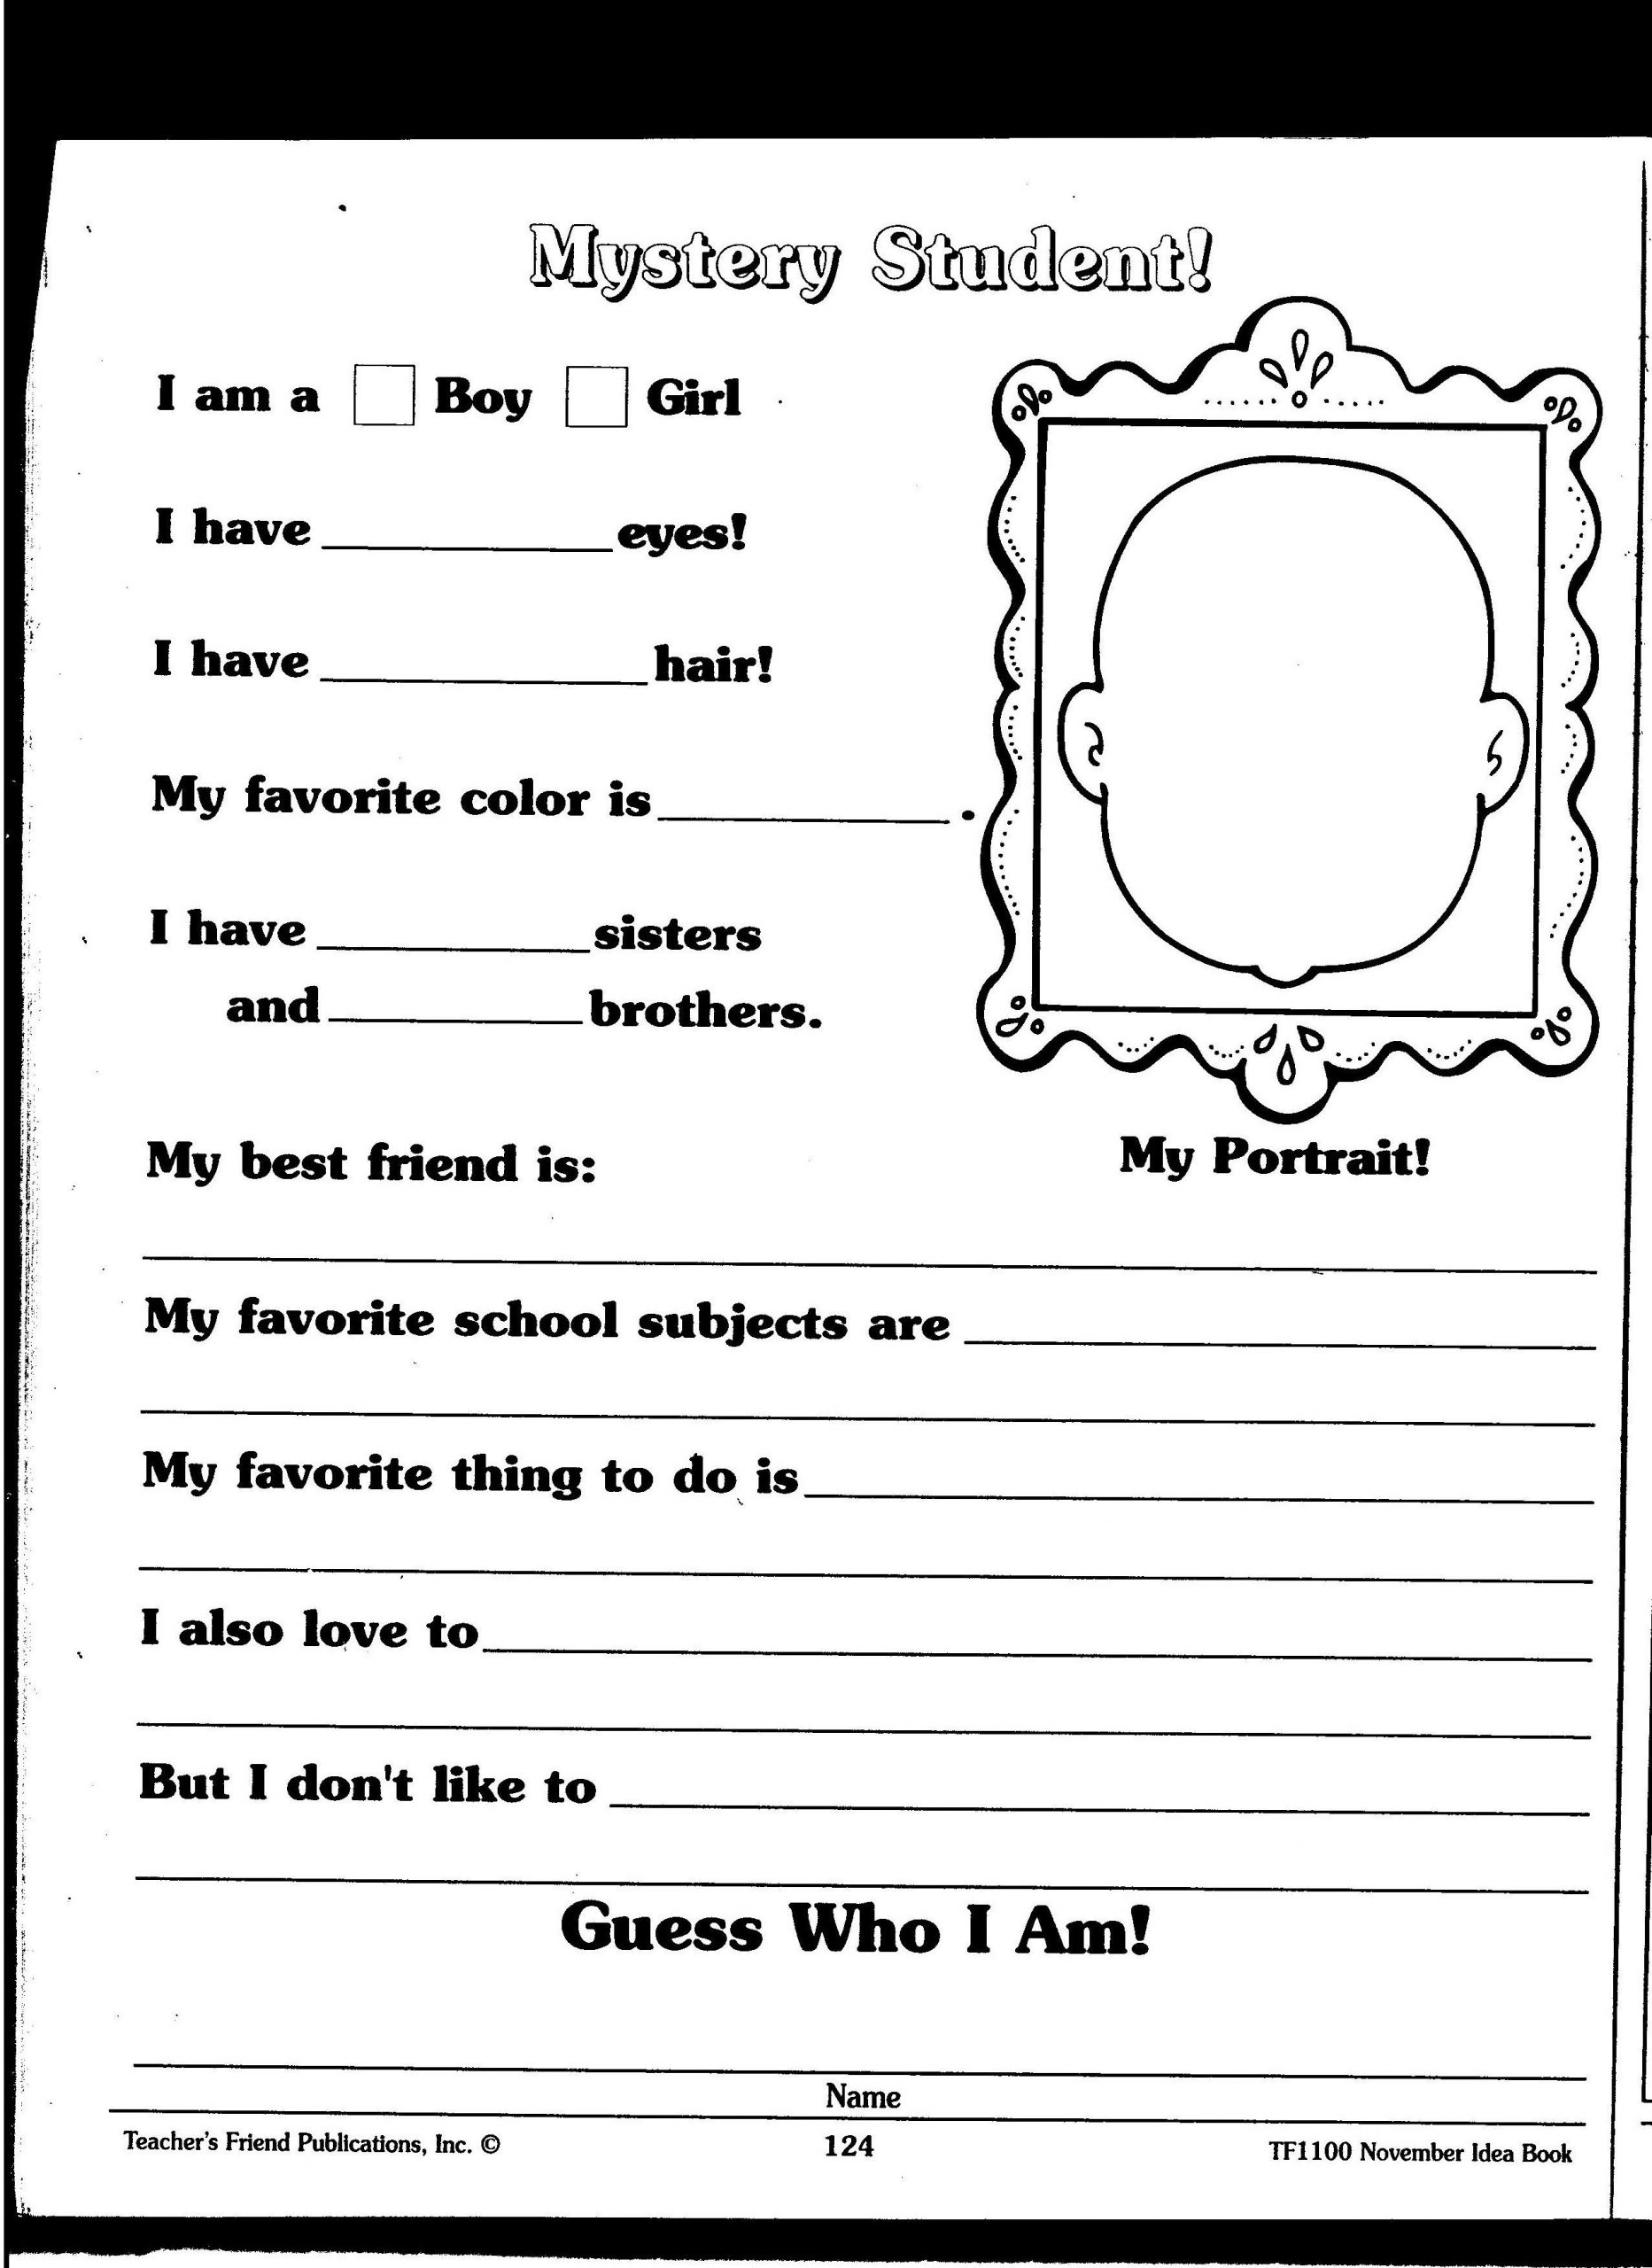 All About Me Lesson Plans All About Me Lesson Plans Mystery Student Worksheet